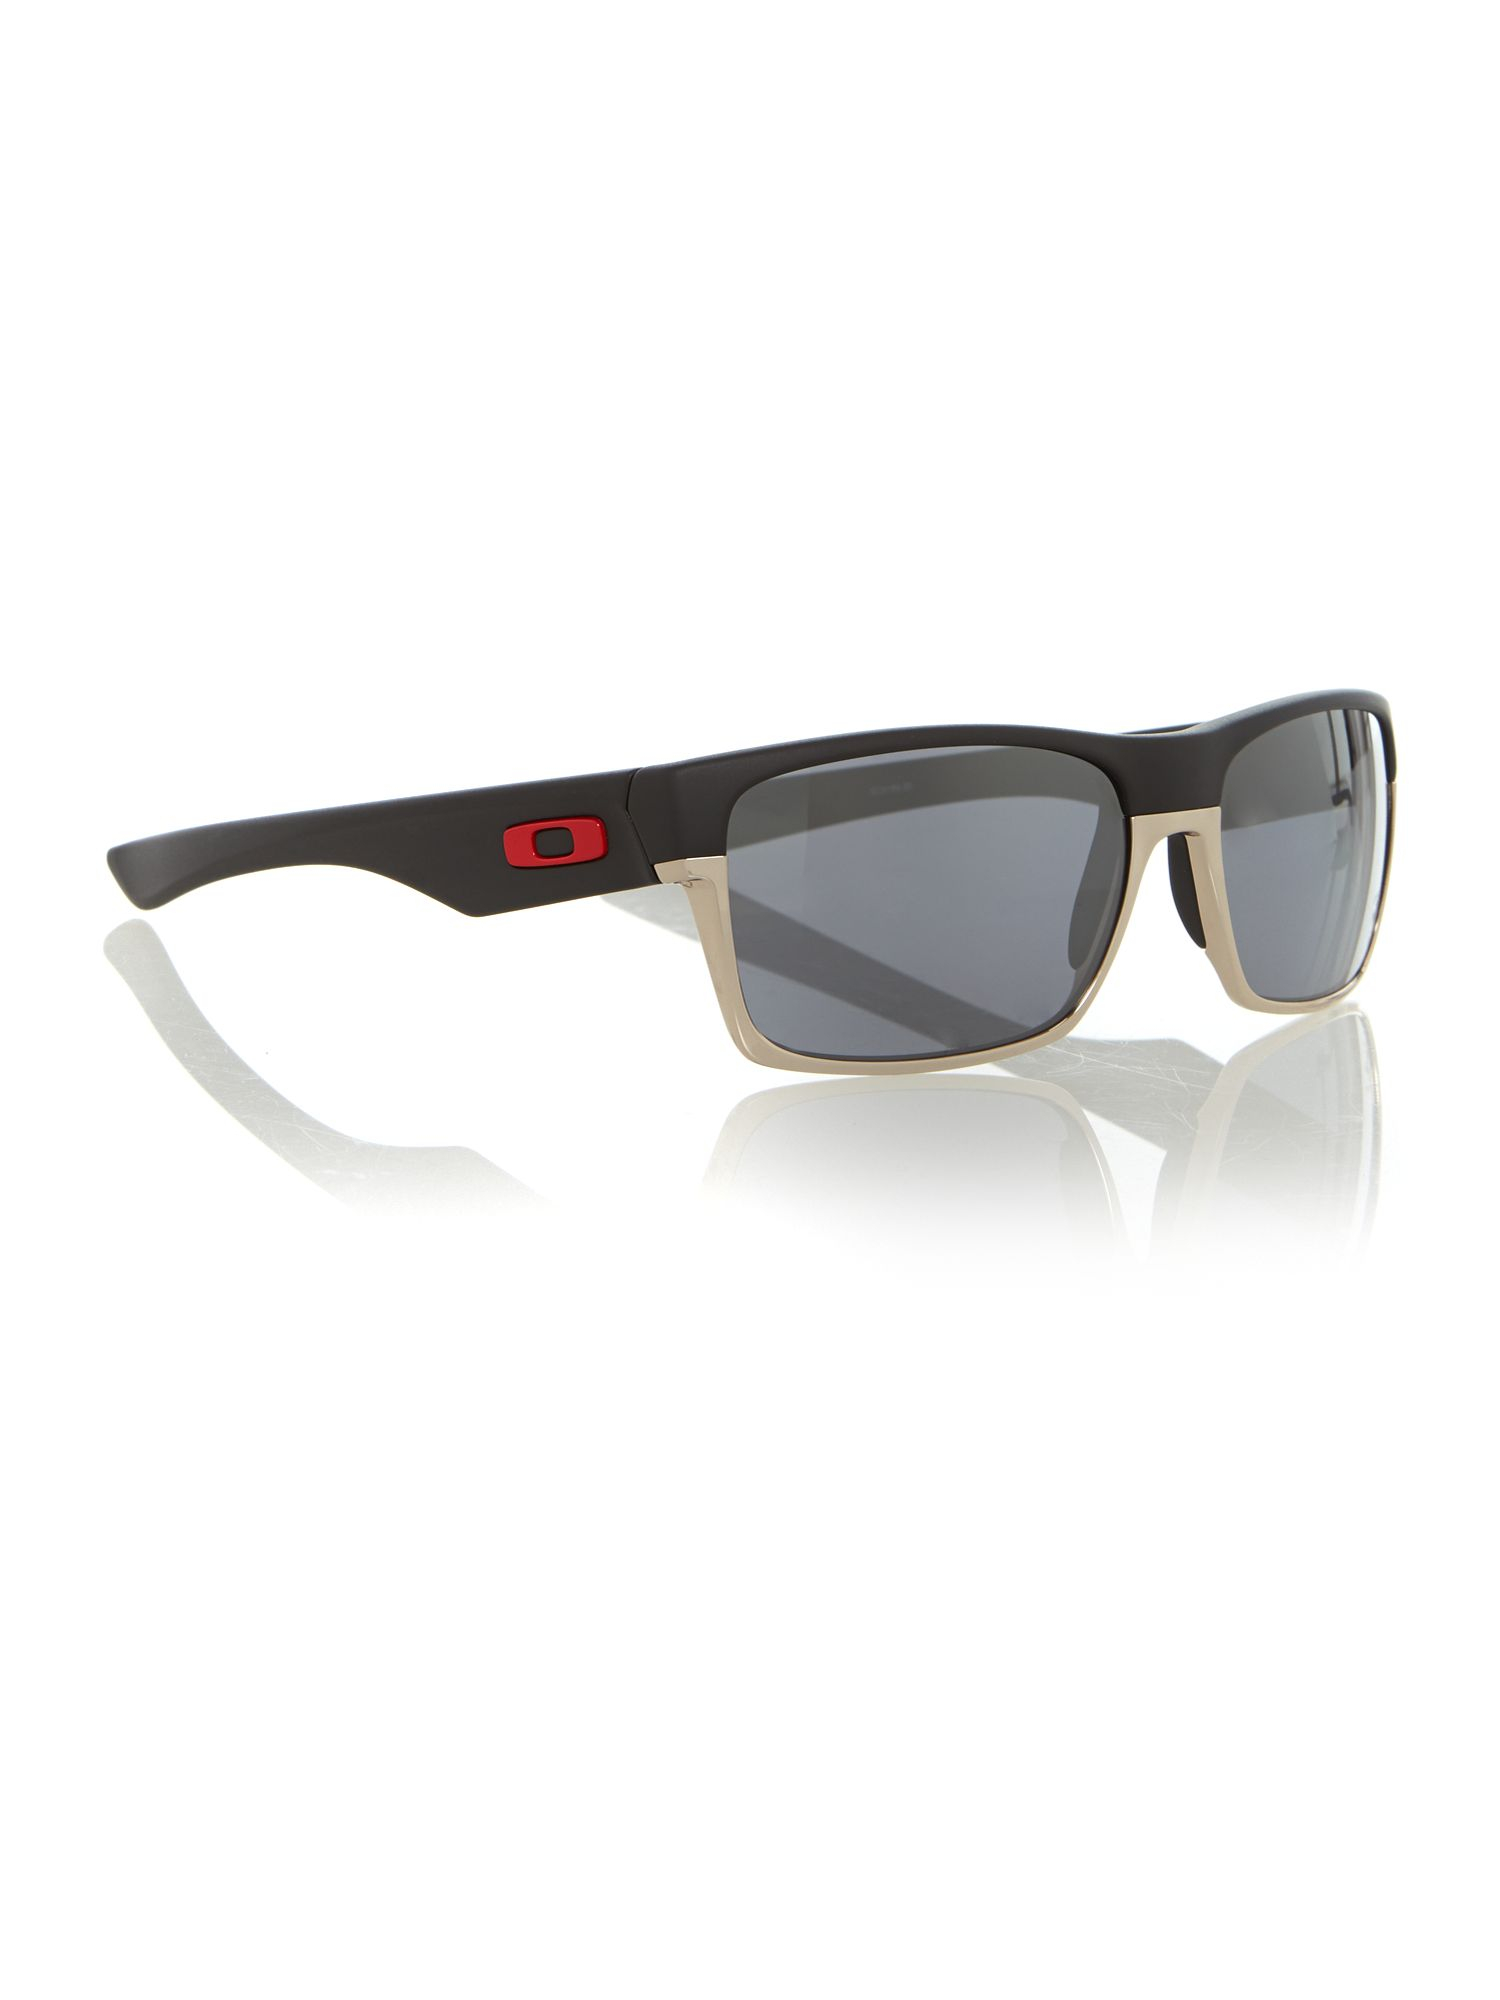 oakley red white sunglasses blue and